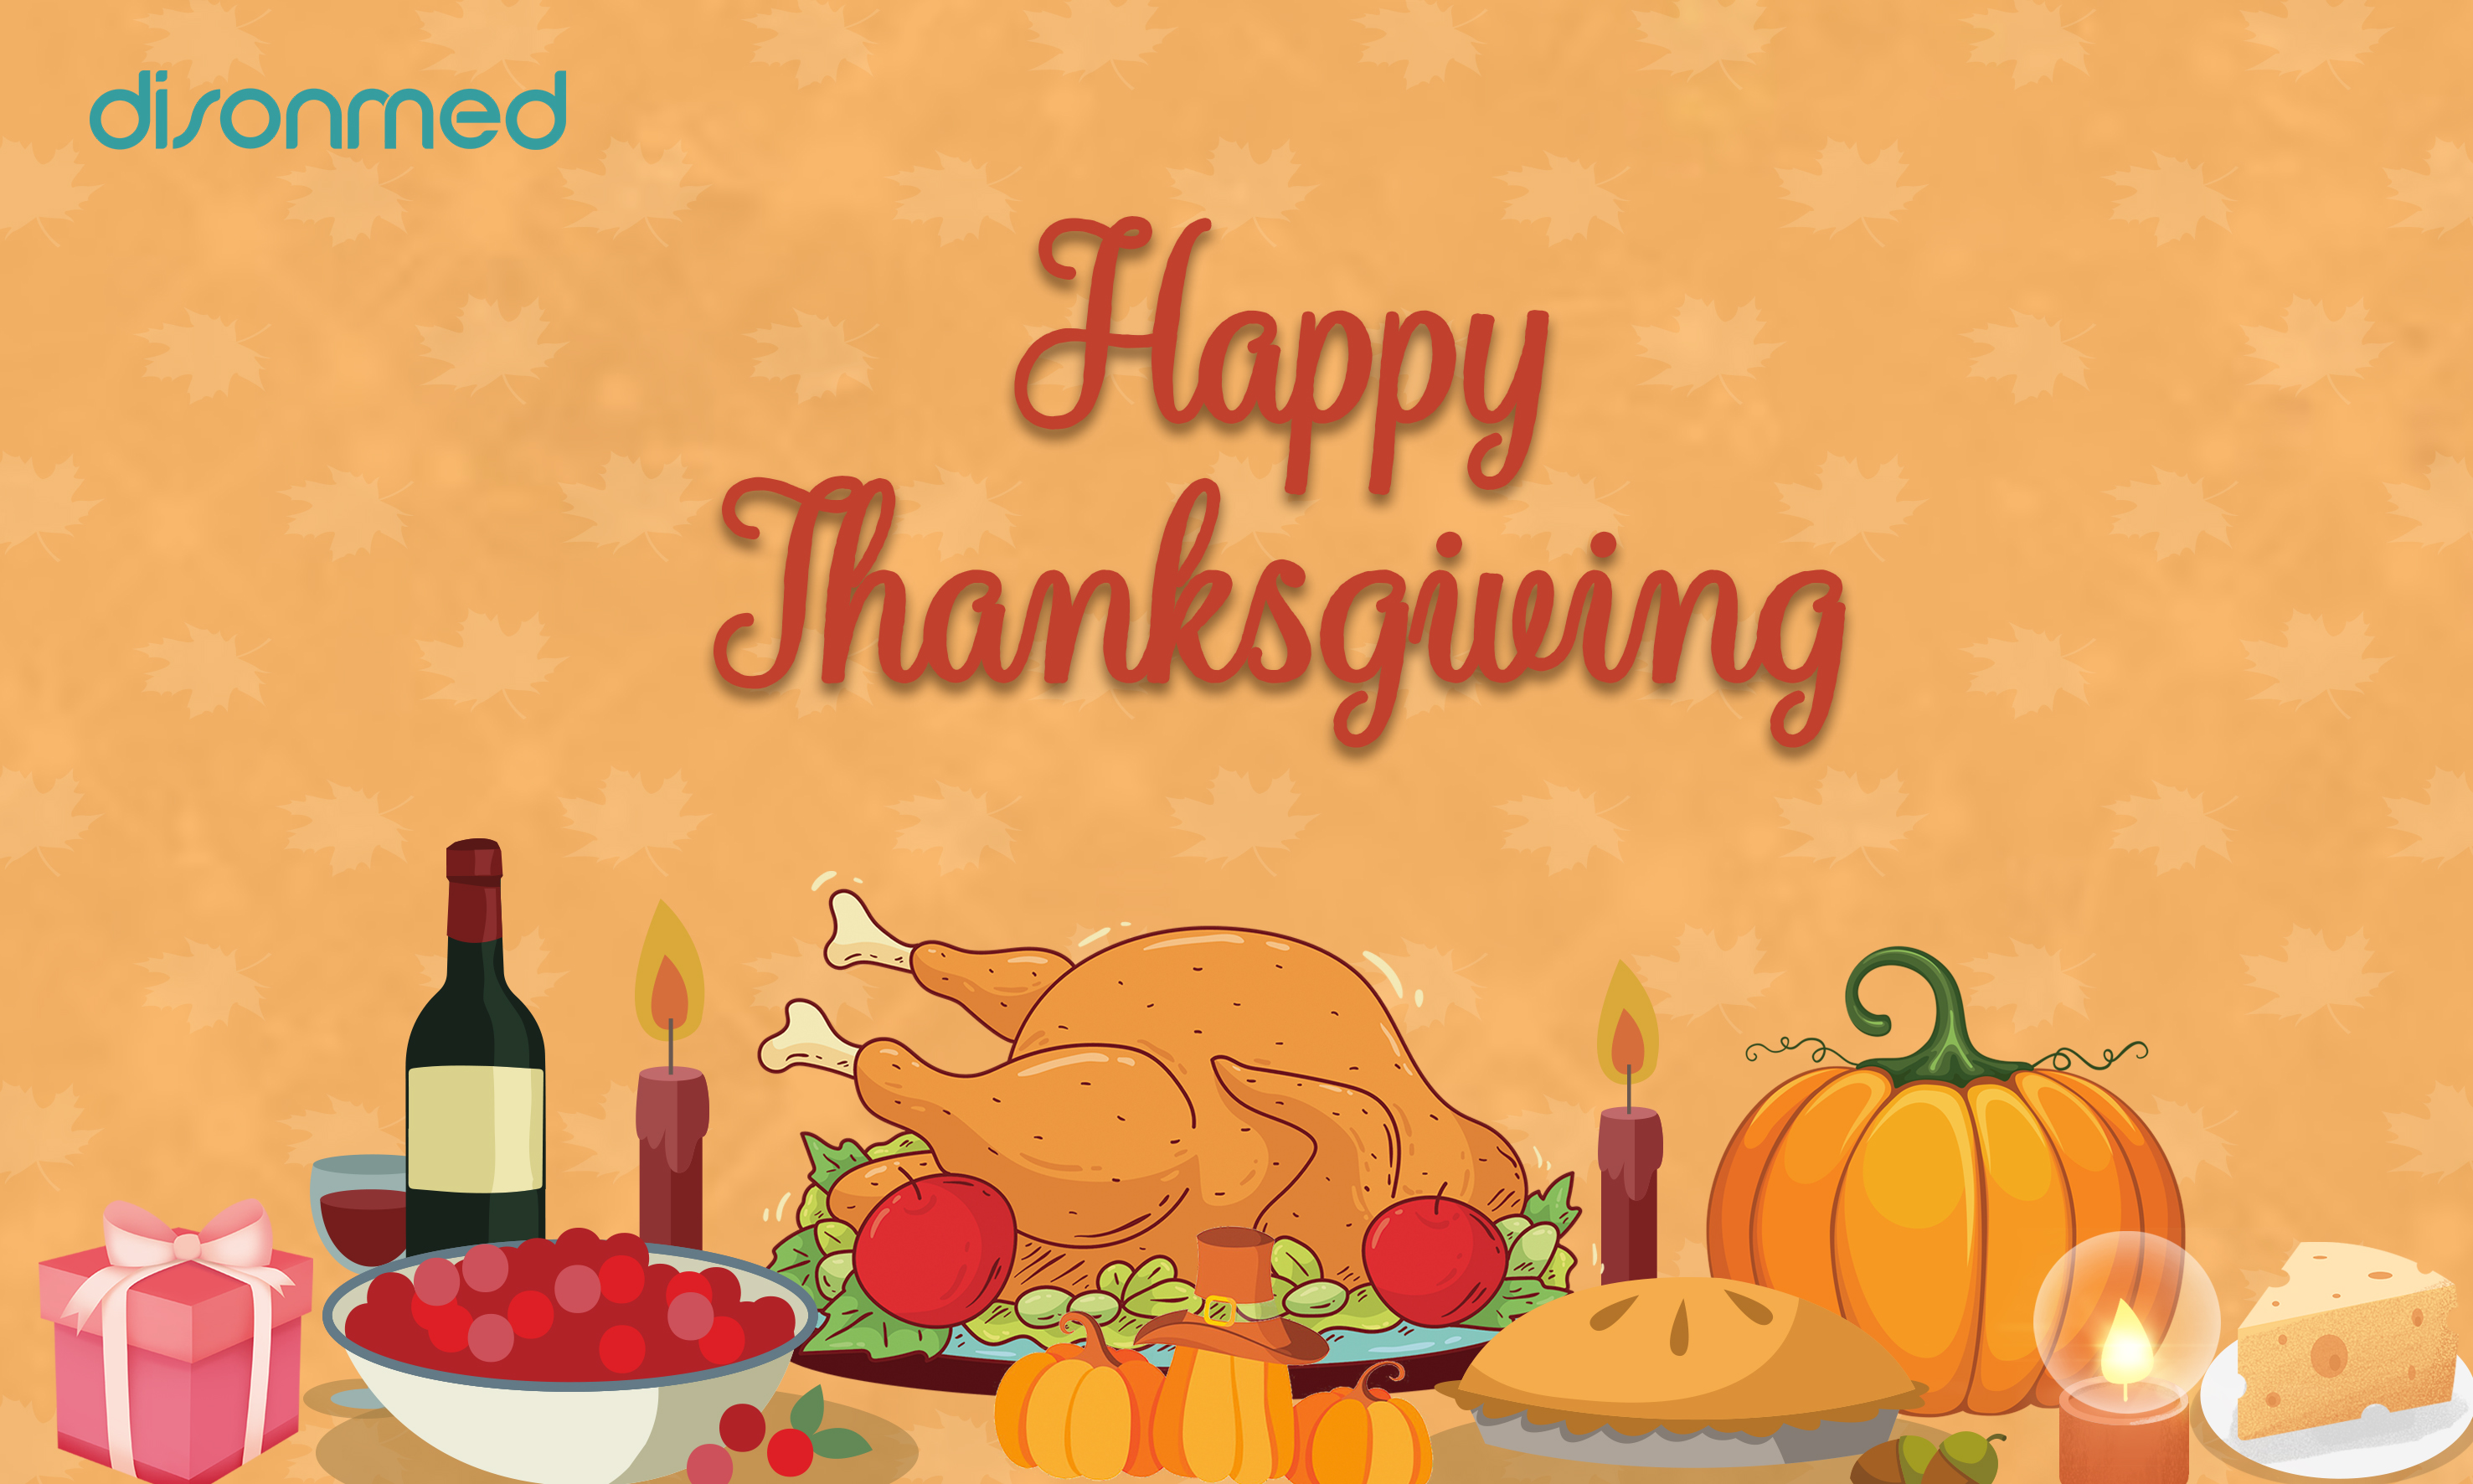 Wishing a very Happy Thanksgiving to you.